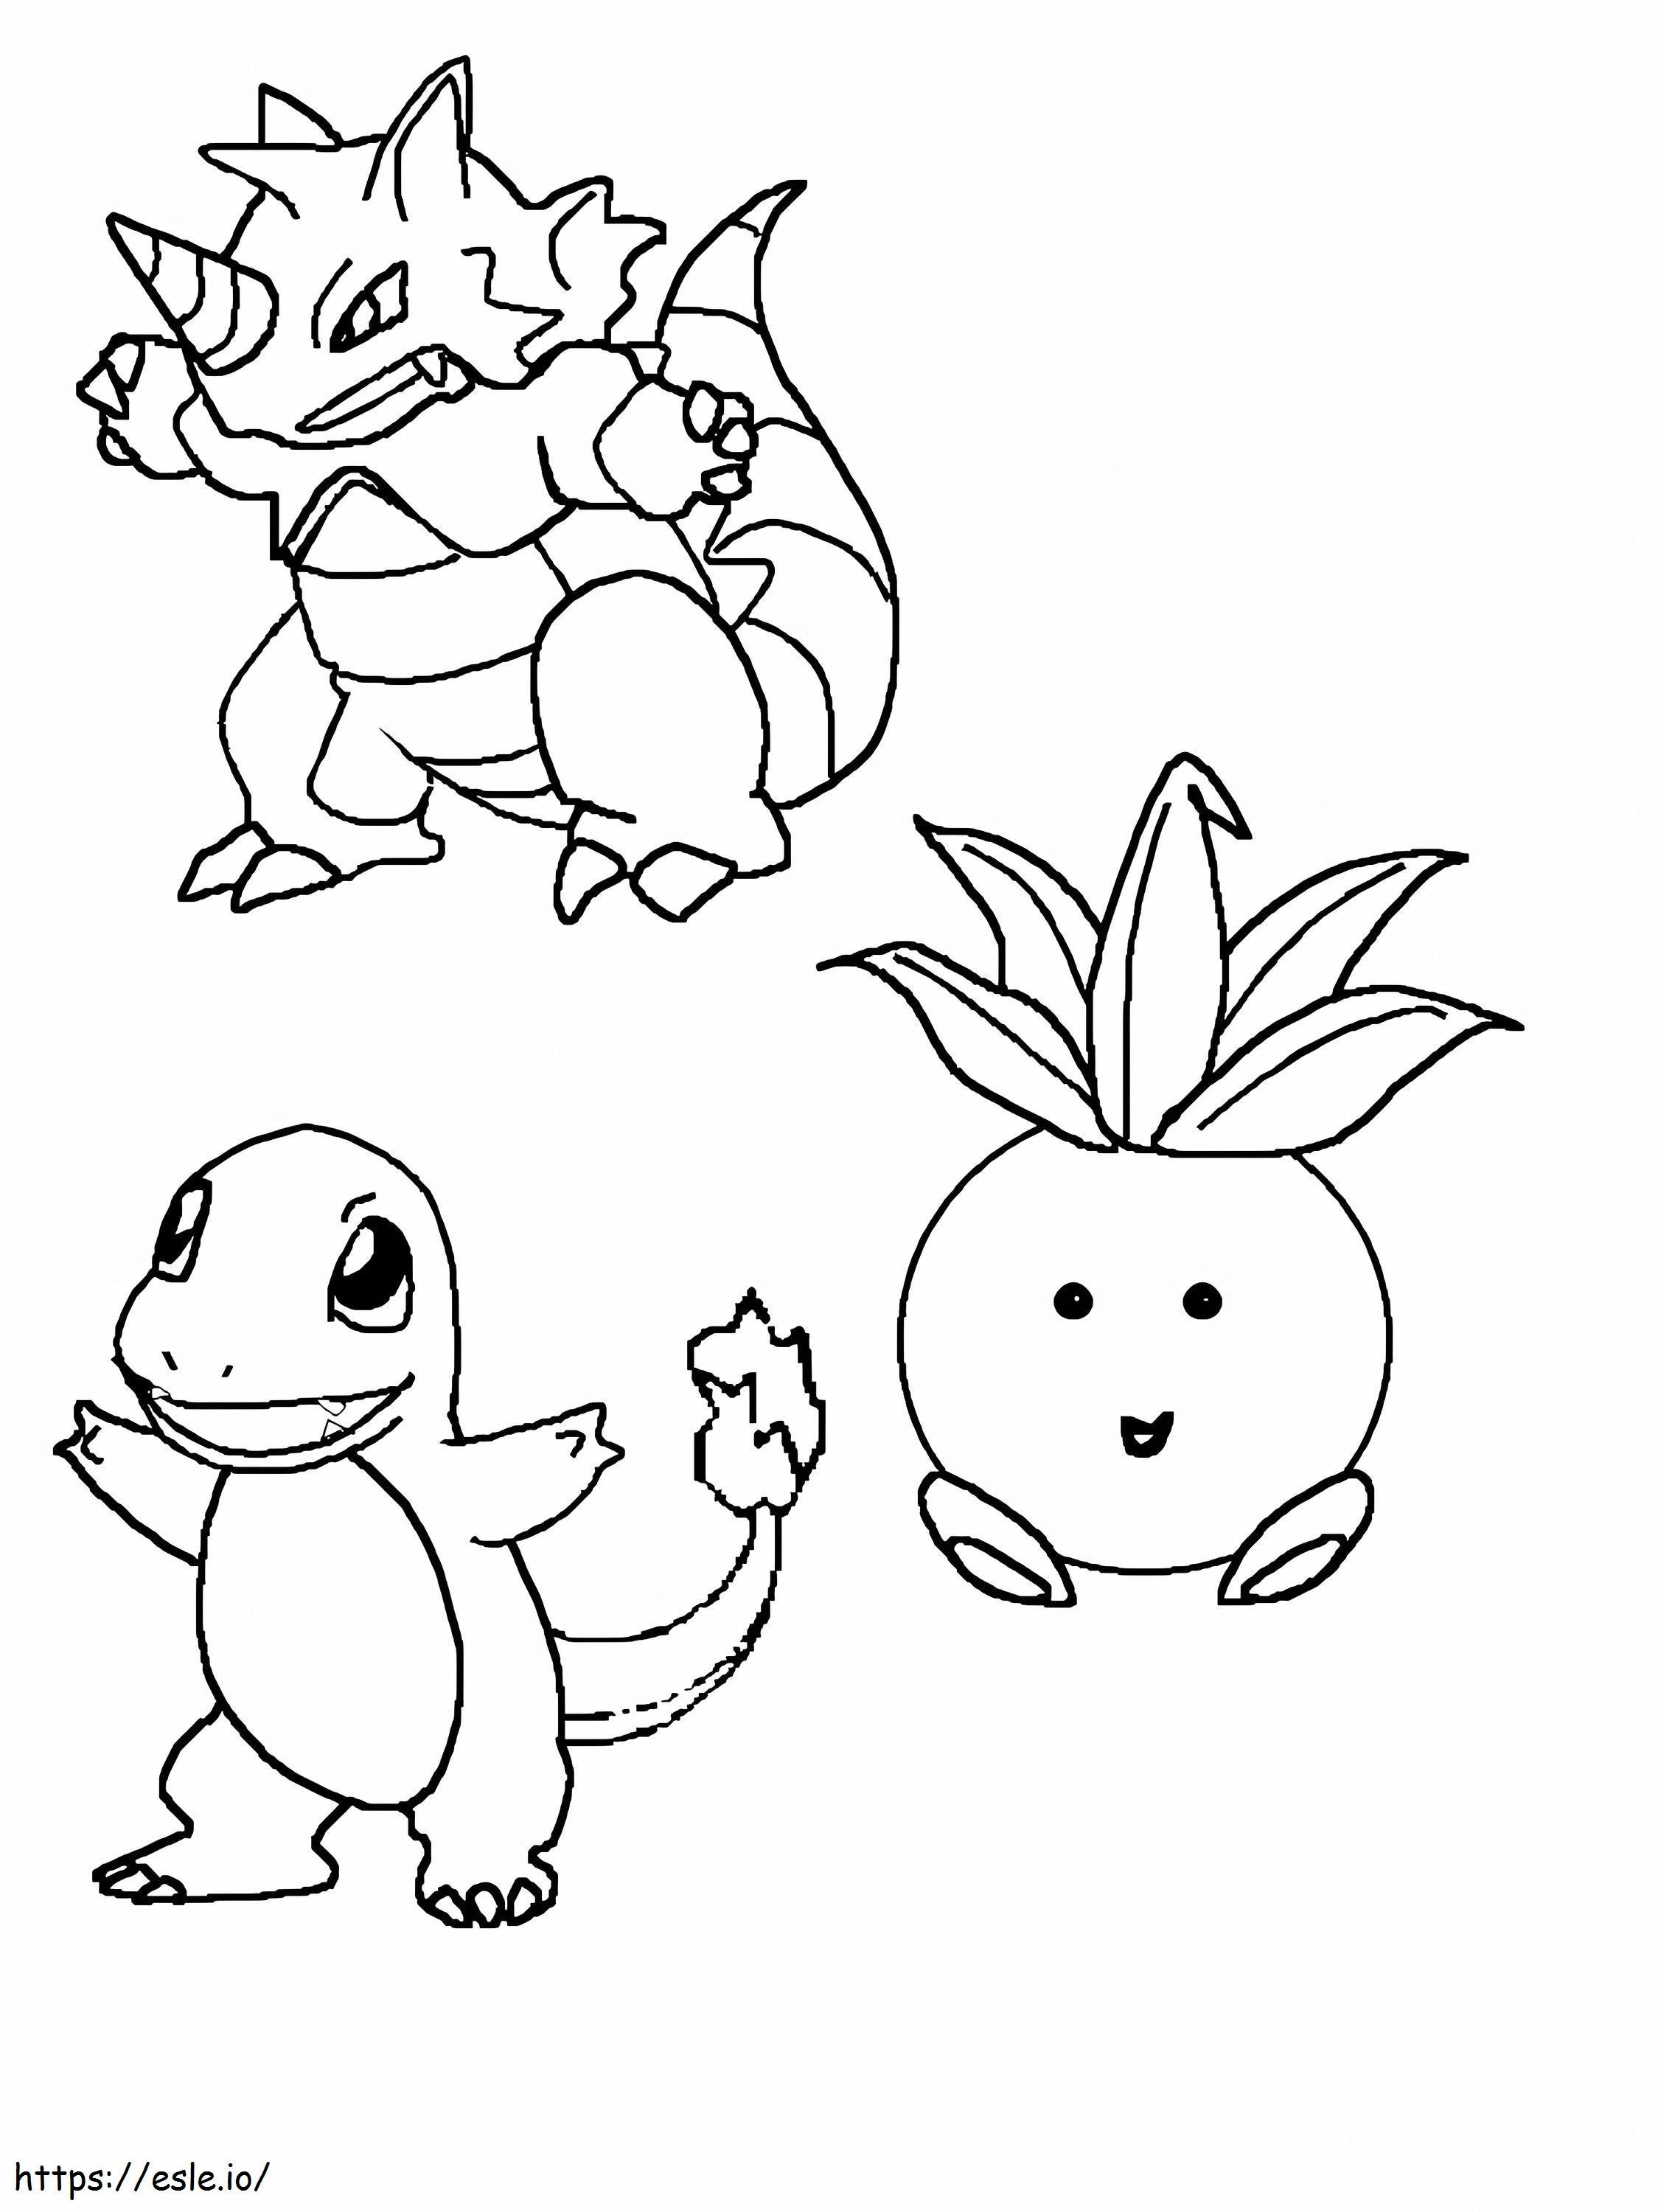 Rhydon 6 coloring page